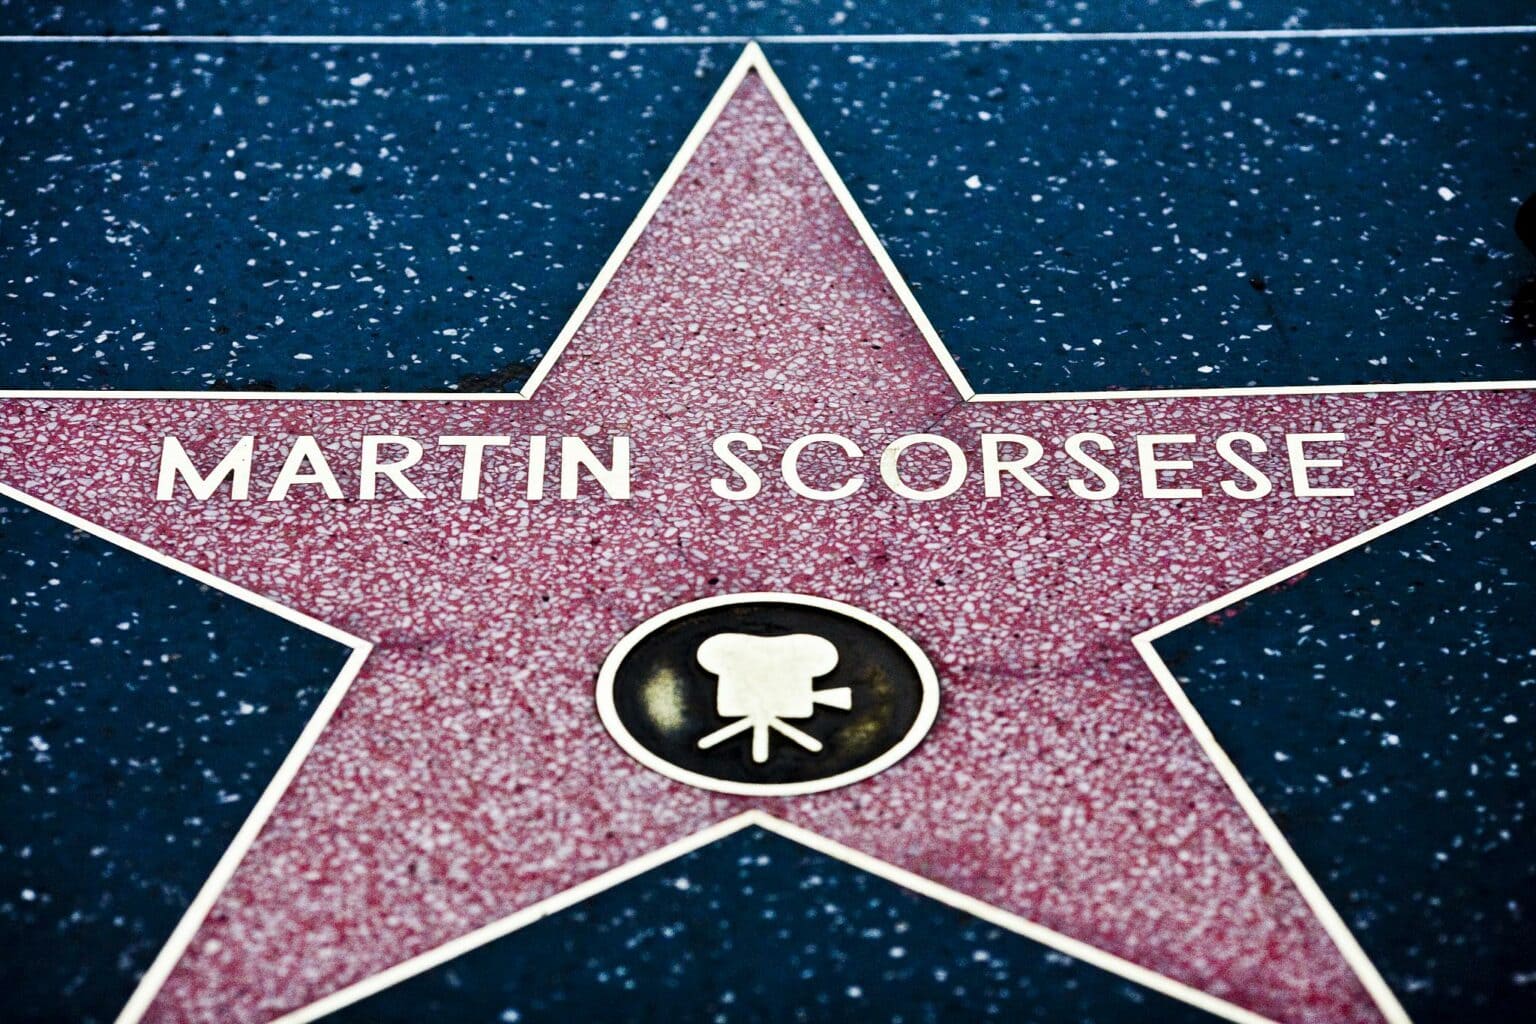 Martin Scorsese is the latest star to land at Apple TV+, this time thanks to a deal with his Sikelia Productions.